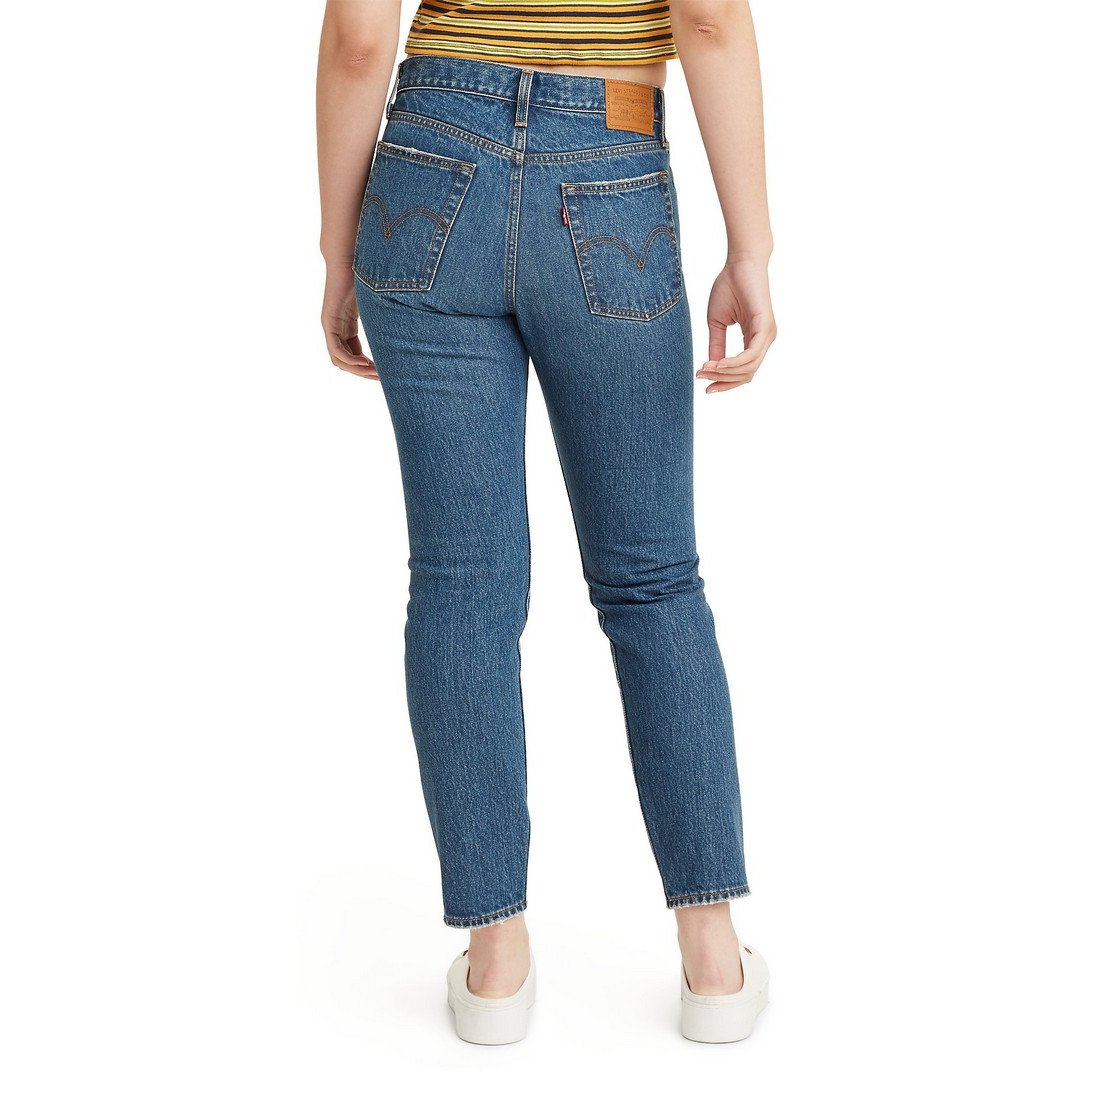 Levi's- Wedgie Icon Fit in 